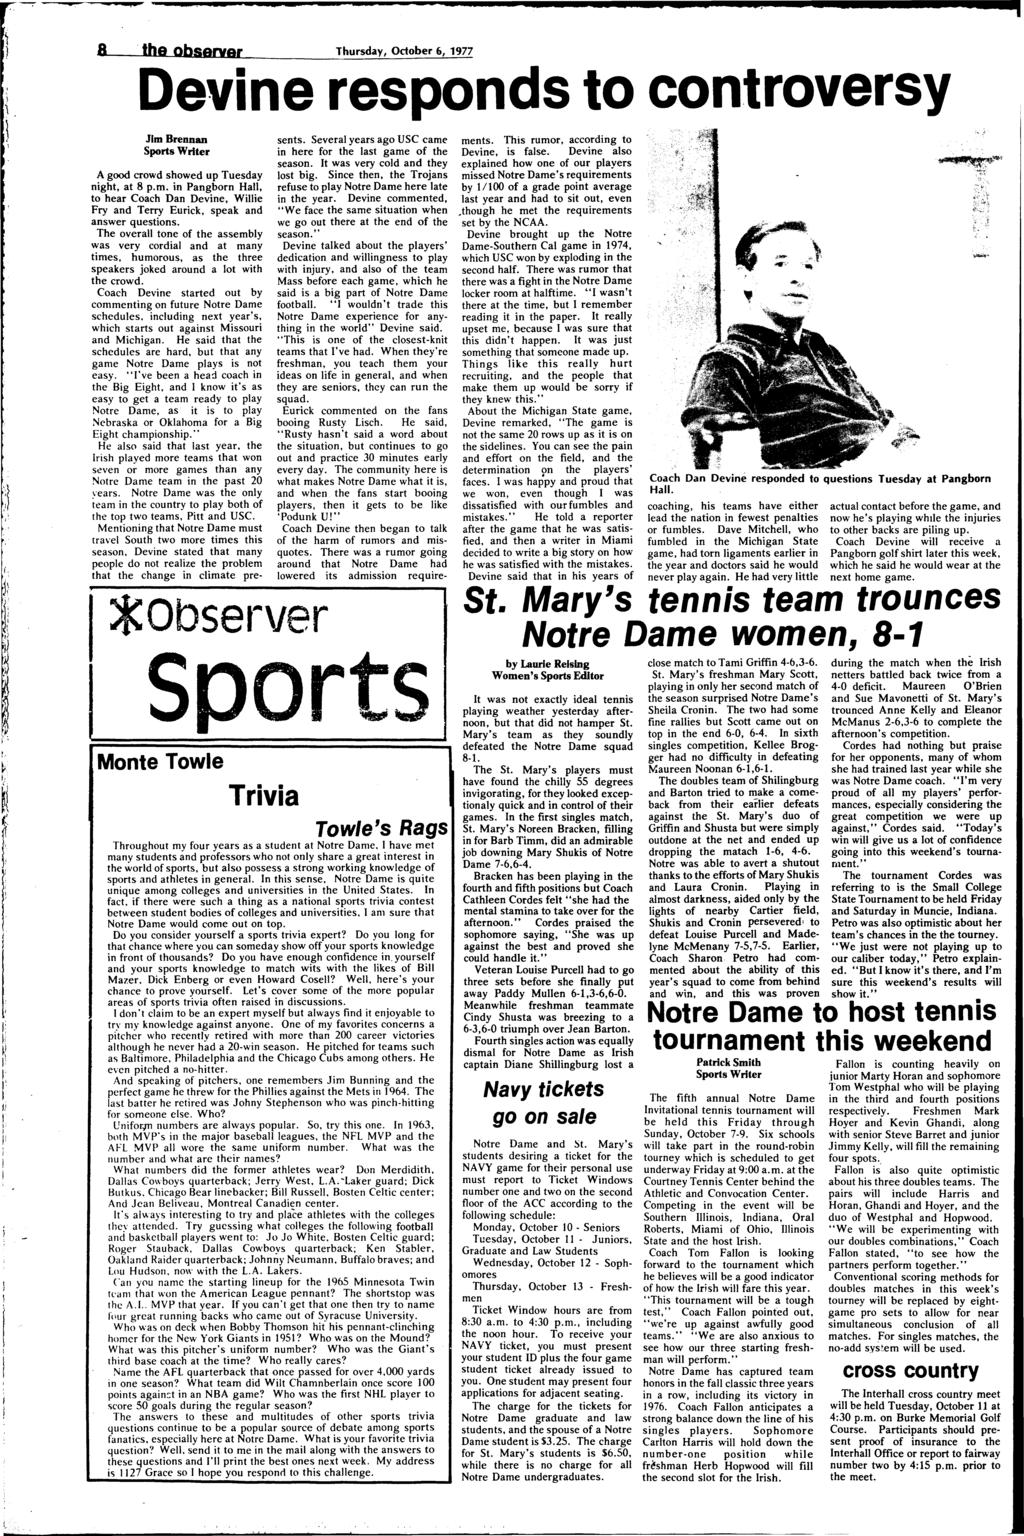 8 he observer Thursday, Ocober 6, 1977 Devine responds o conroversy,. i. Jim Brennan Spors Wrier Mone Towle Trivia A good crowd showed up Tuesday nigh, a 8 p.m. in Pangborn Hall, o hear Coach Dan Devine, Willie in he year.